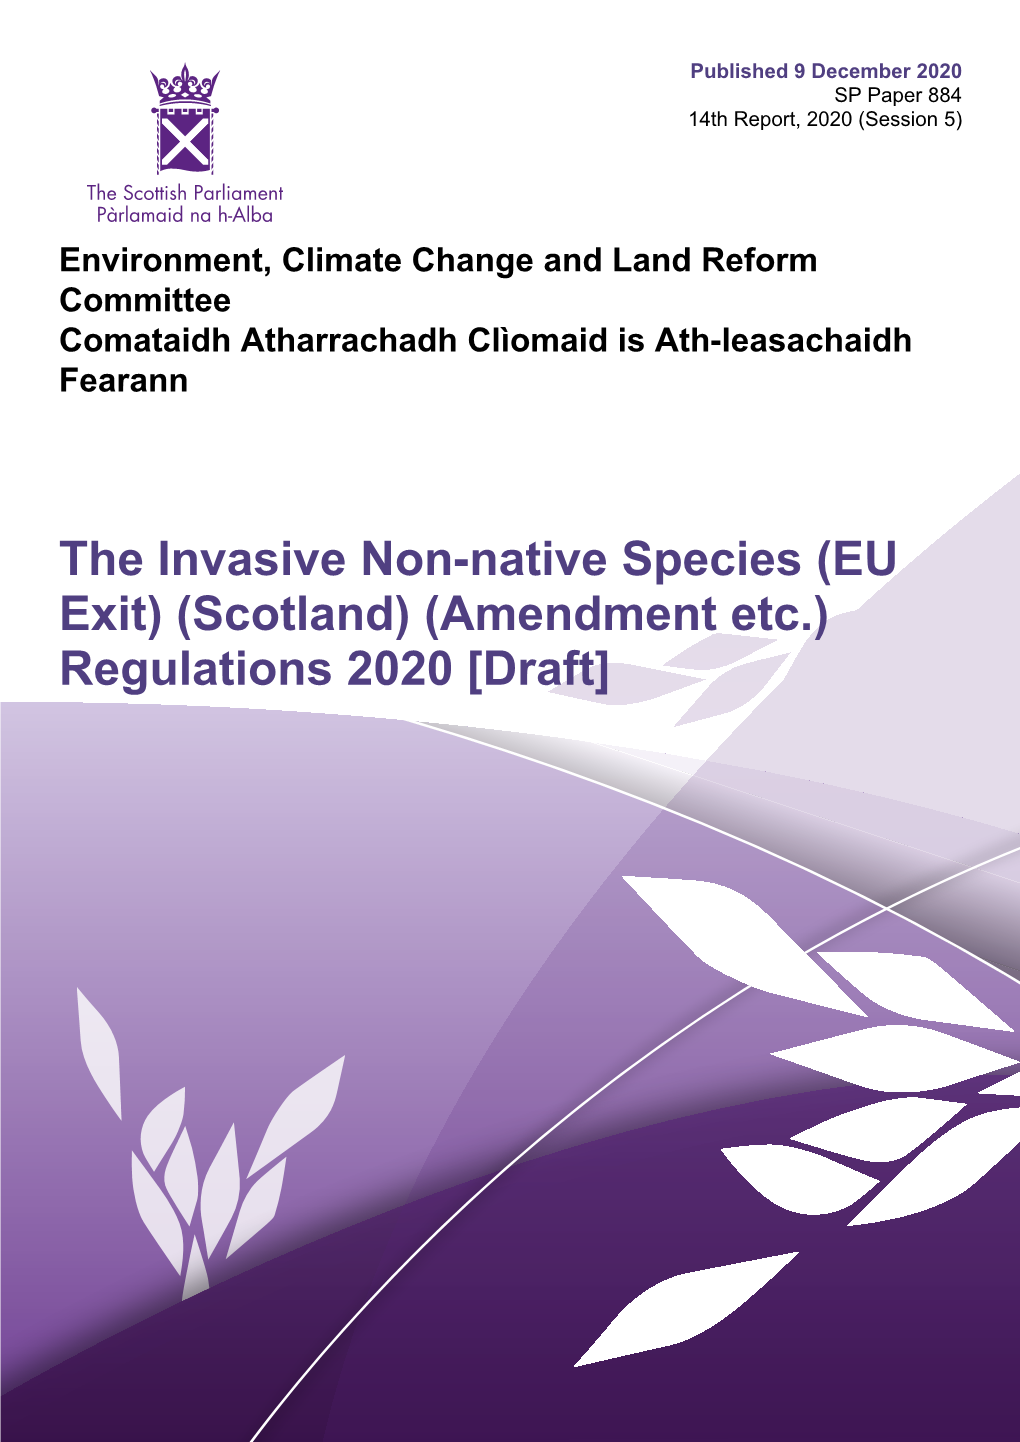 The Invasive Non-Native Species (EU Exit) (Scotland) (Amendment Etc.) Regulations 2020 [Draft] Published in Scotland by the Scottish Parliamentary Corporate Body